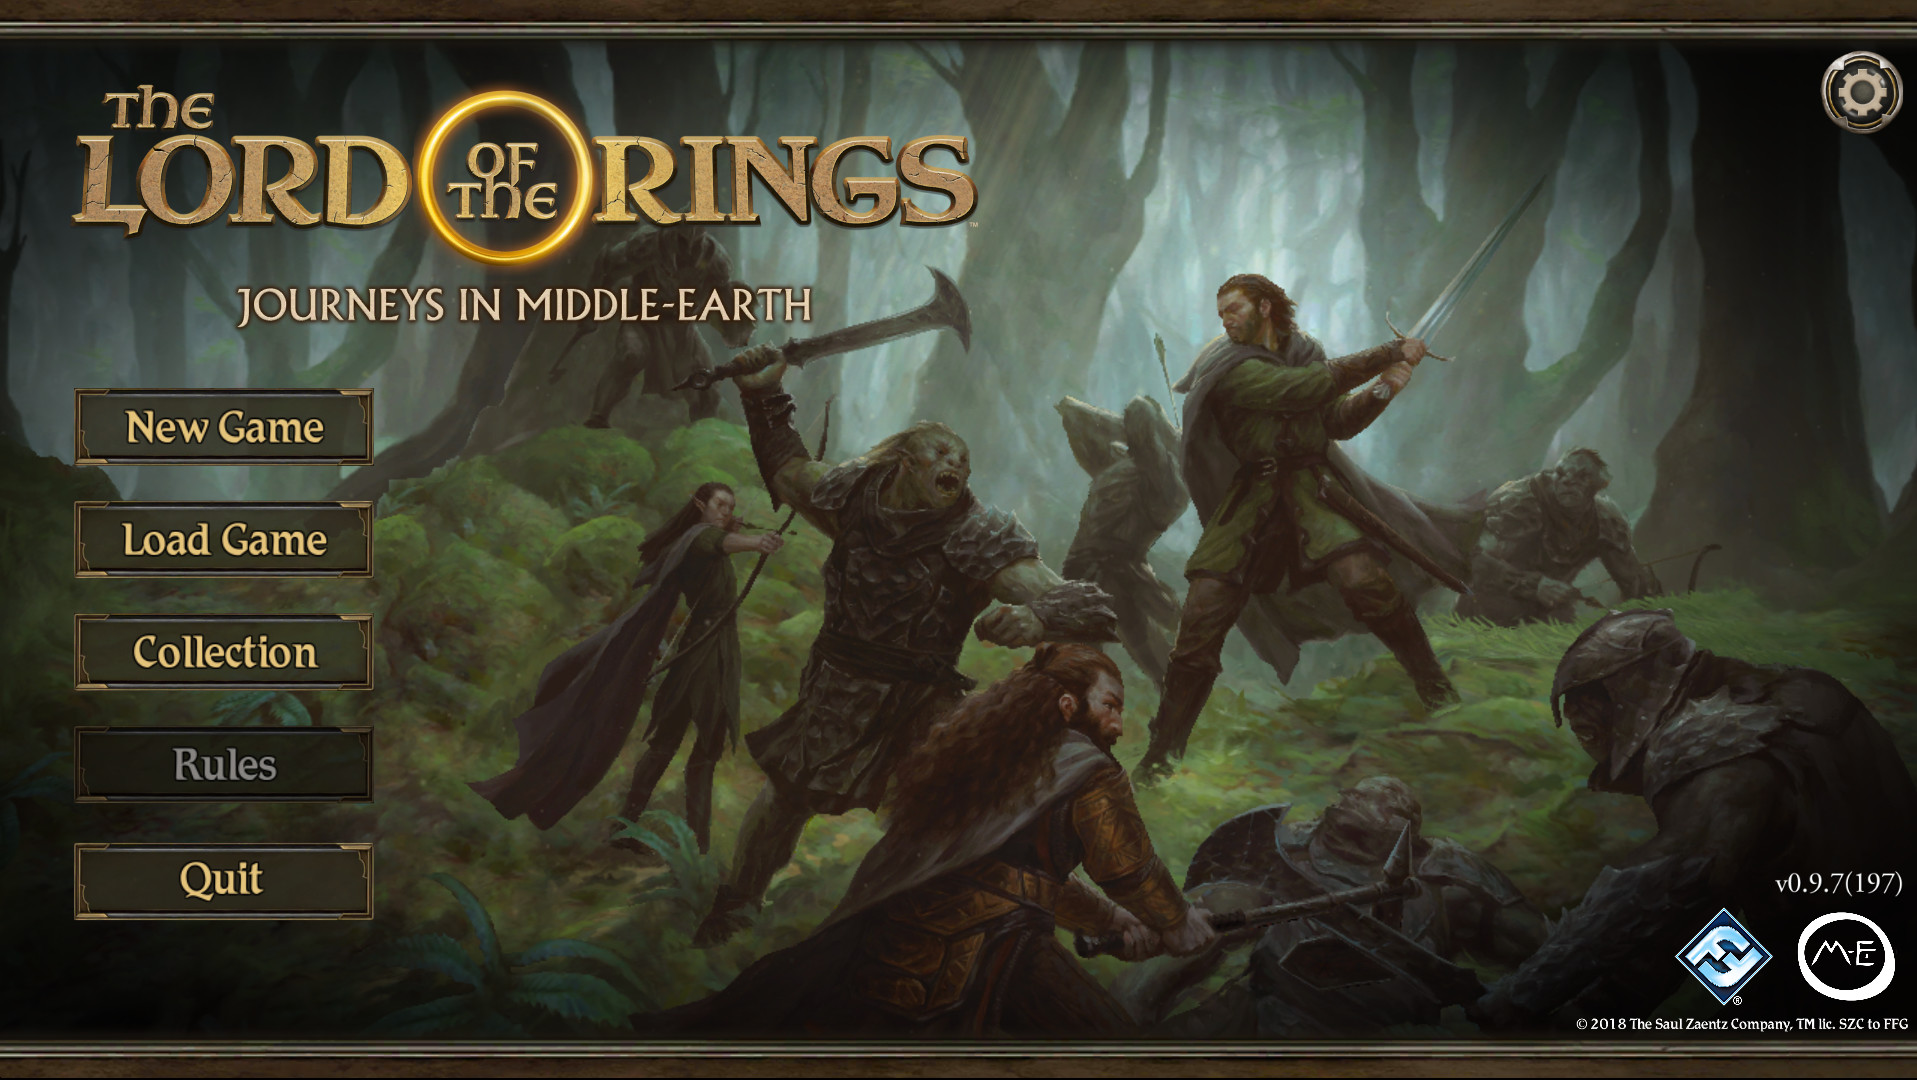 Tage med Kæreste skildpadde The Lord of the Rings: Journeys in Middle-earth on Steam